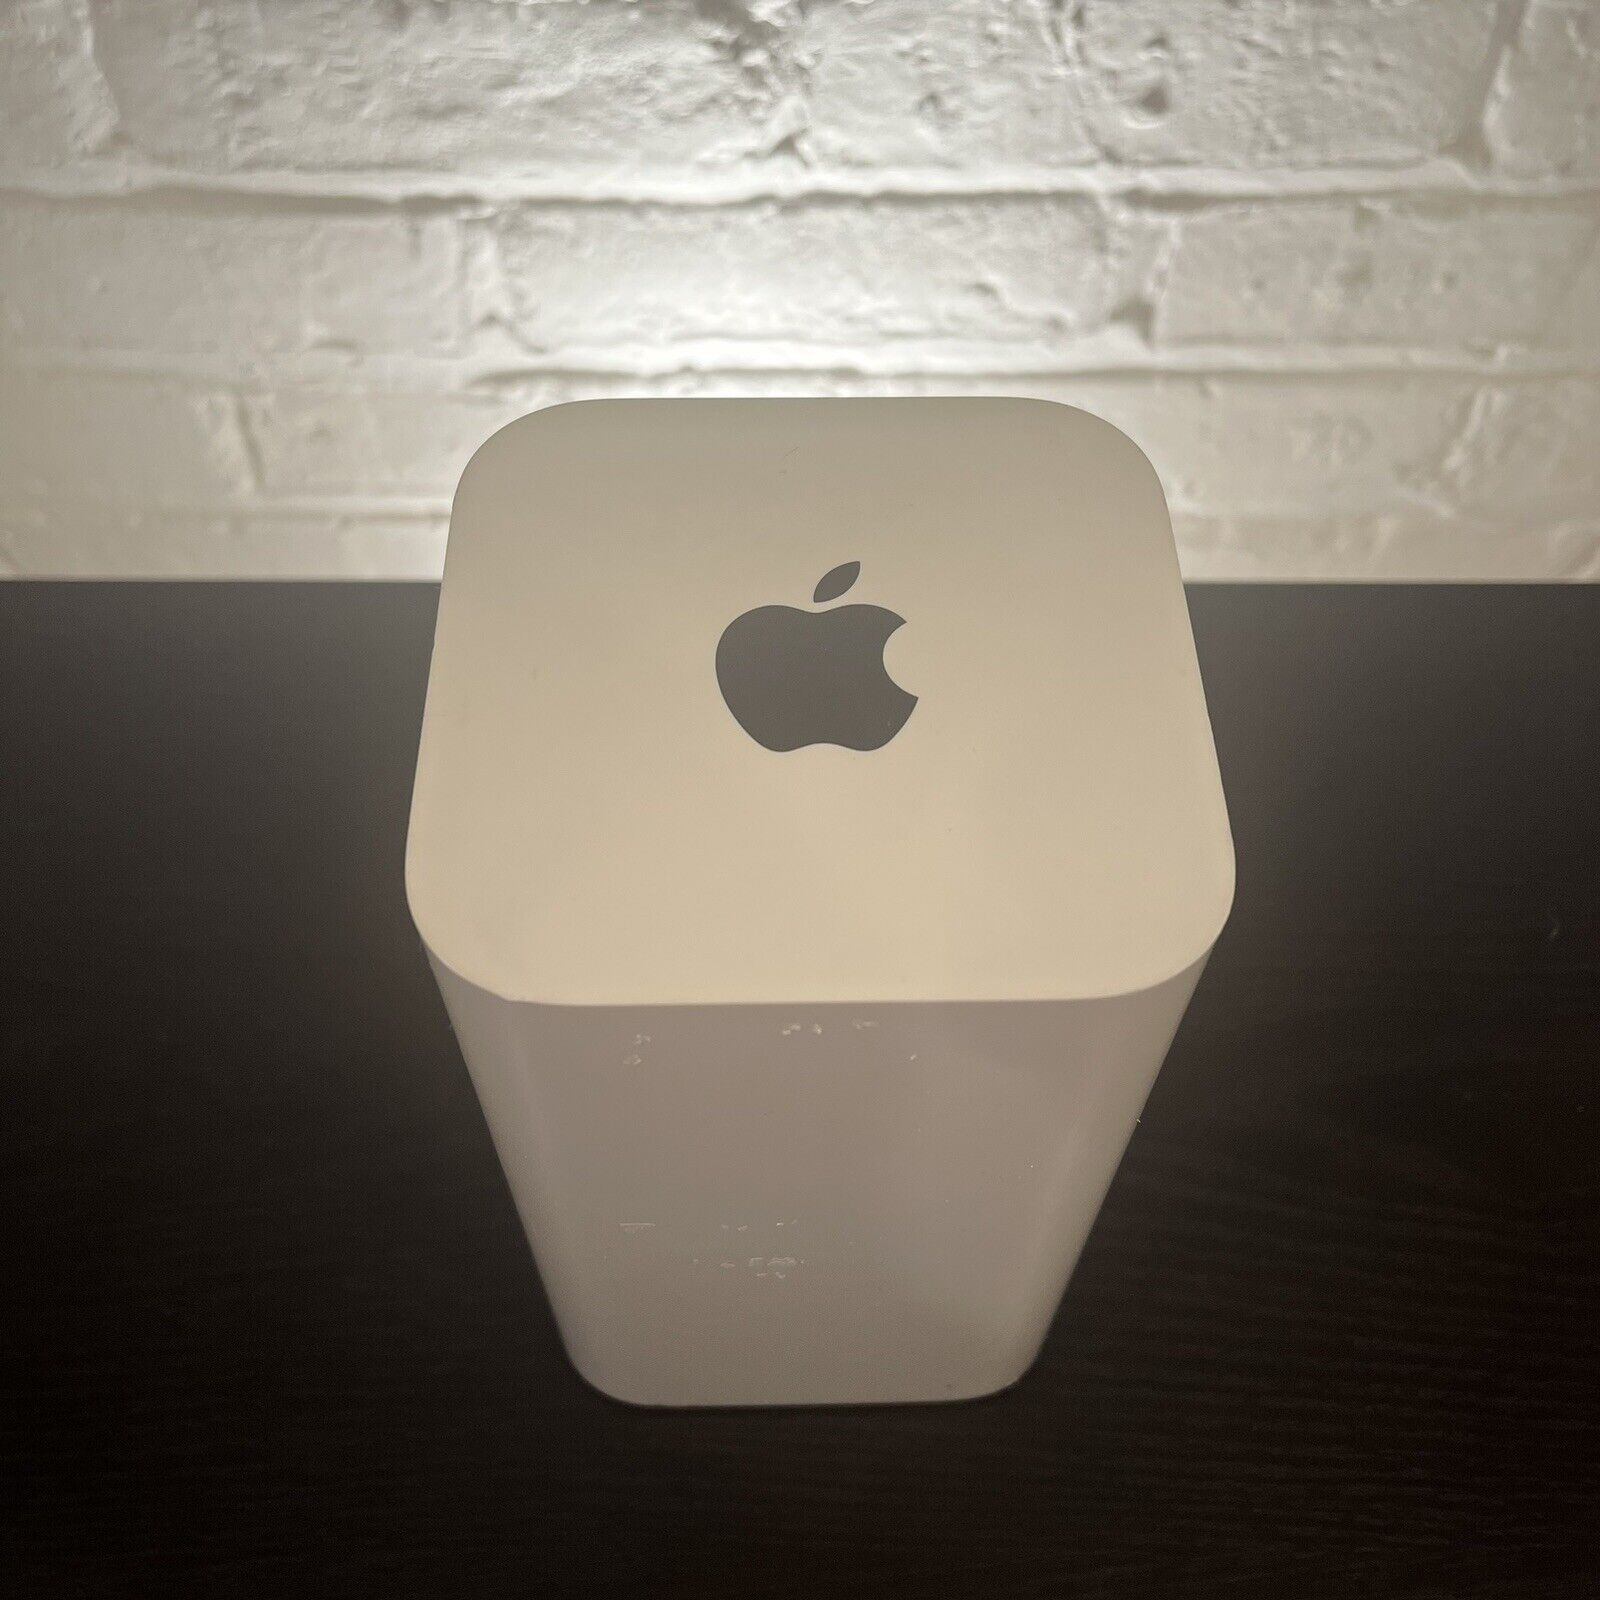 Apple A1470 Airport Extreme 2TB Time Capsule ME177LL/A 802.11ac